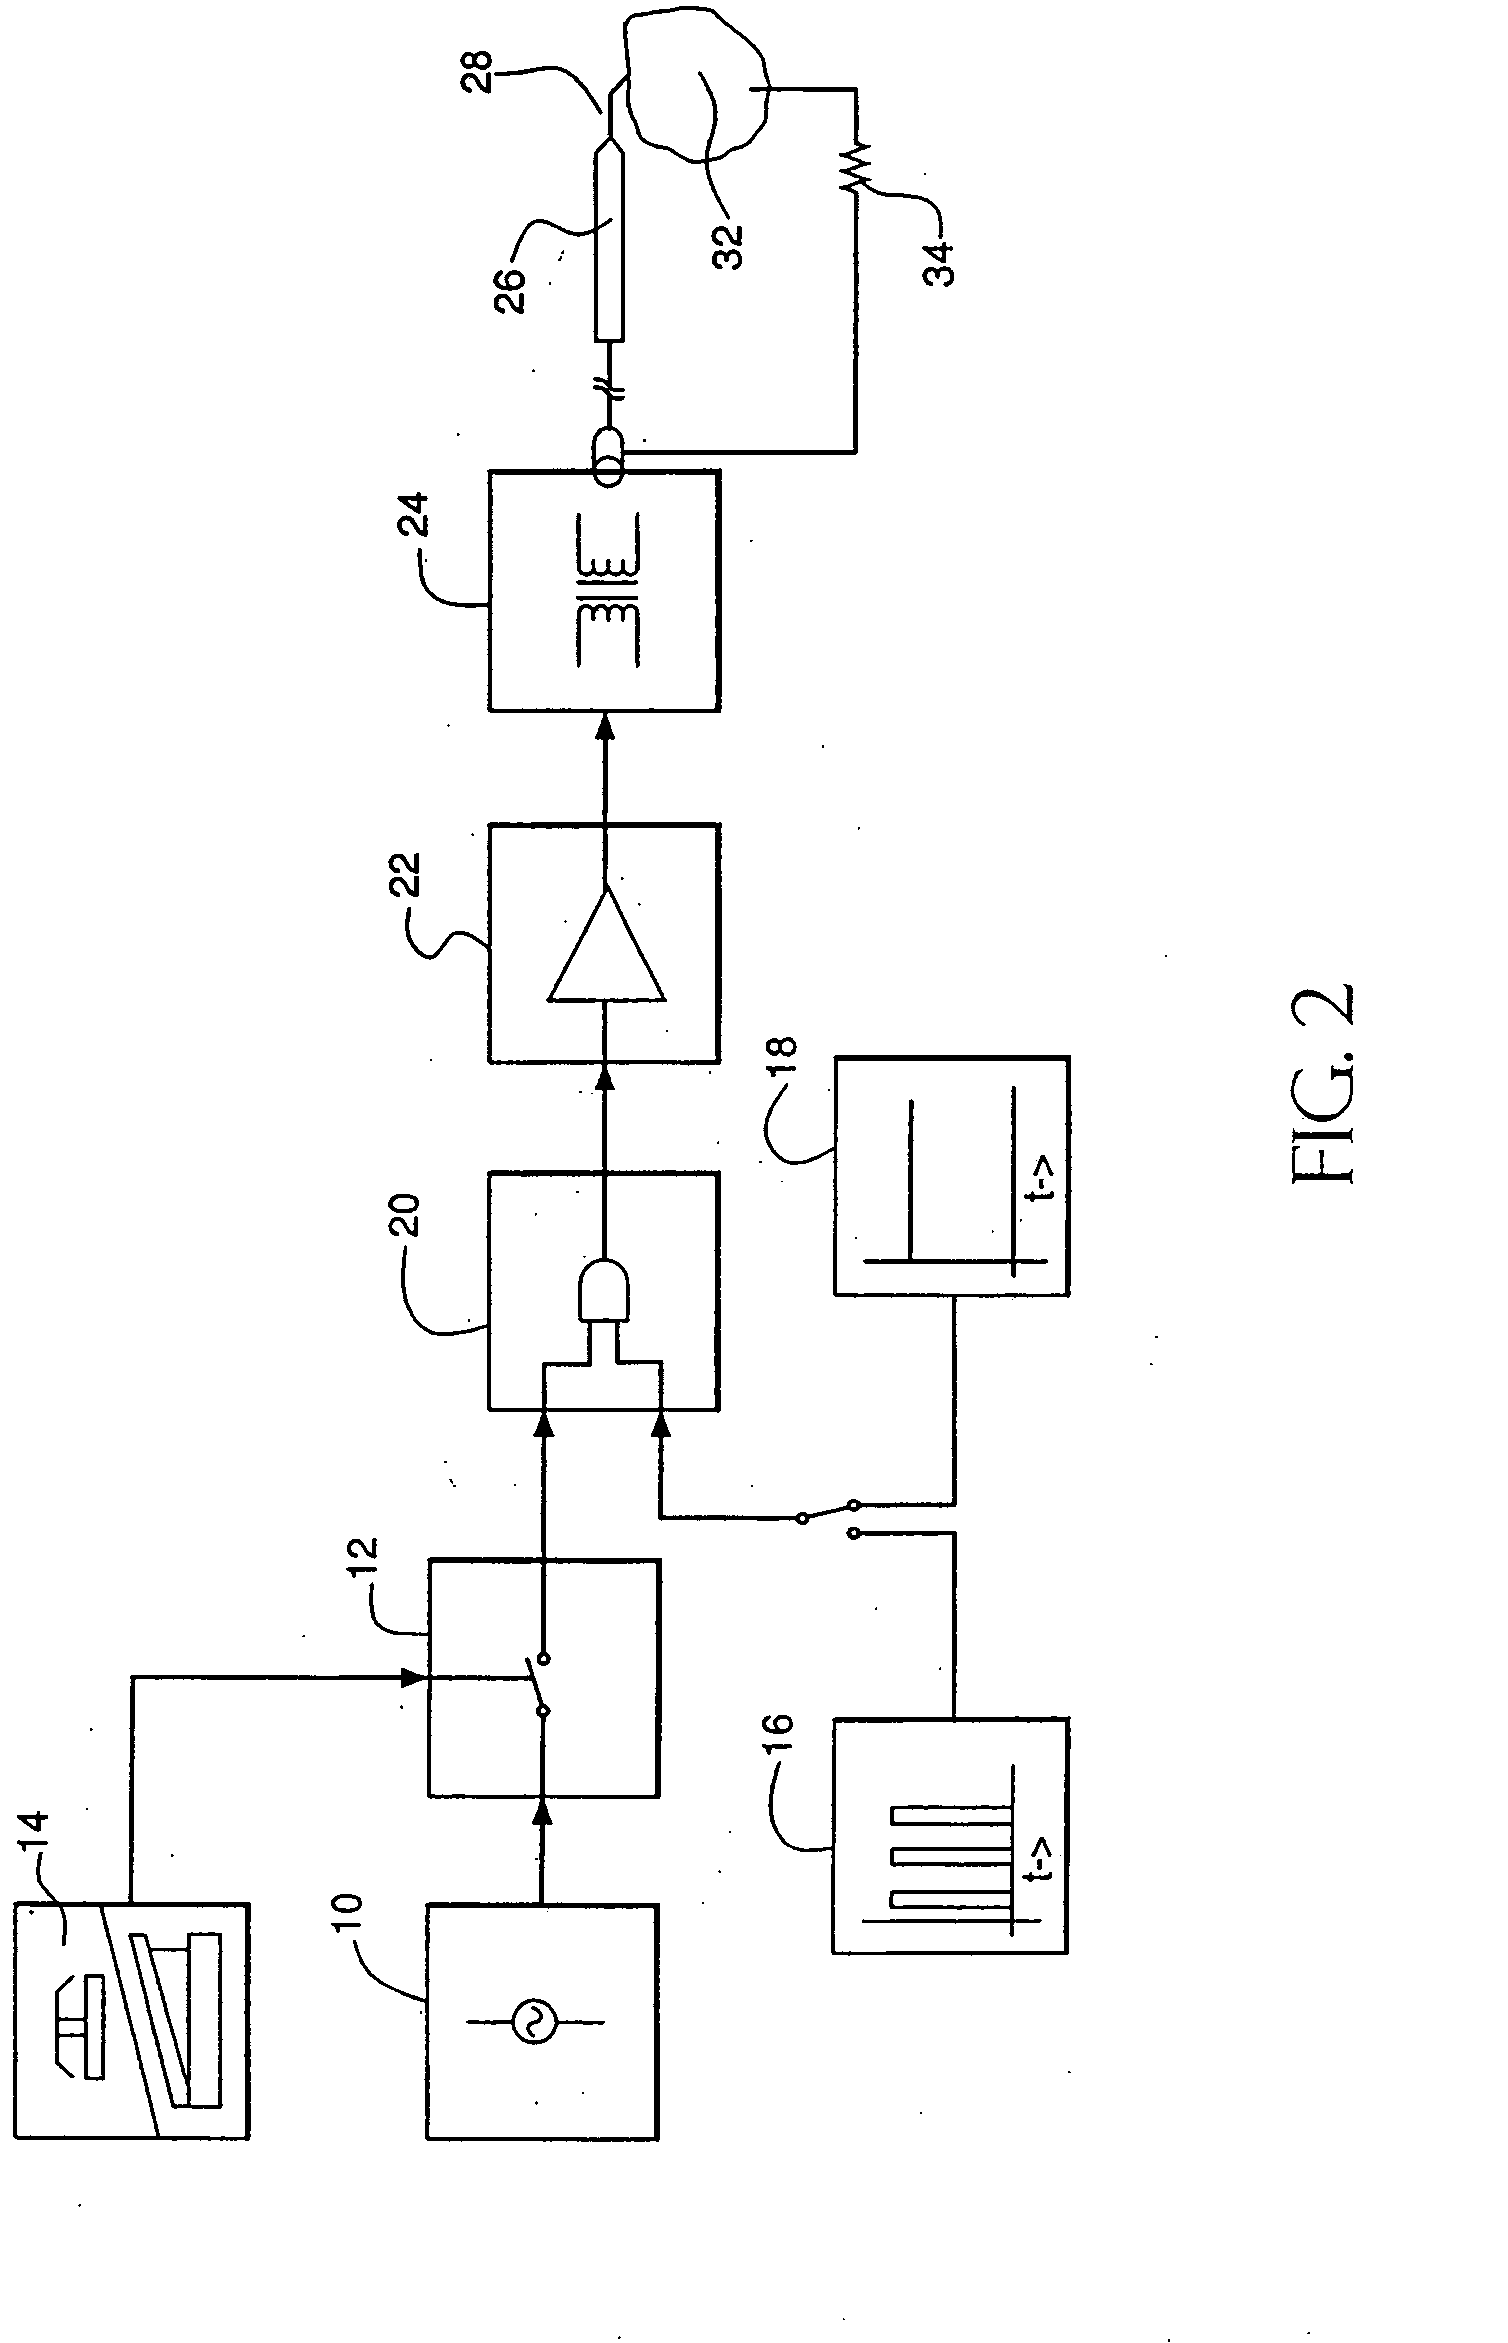 Device for plasma incision of matter with a specifically tuned radiofrequency electromagnetic field generator